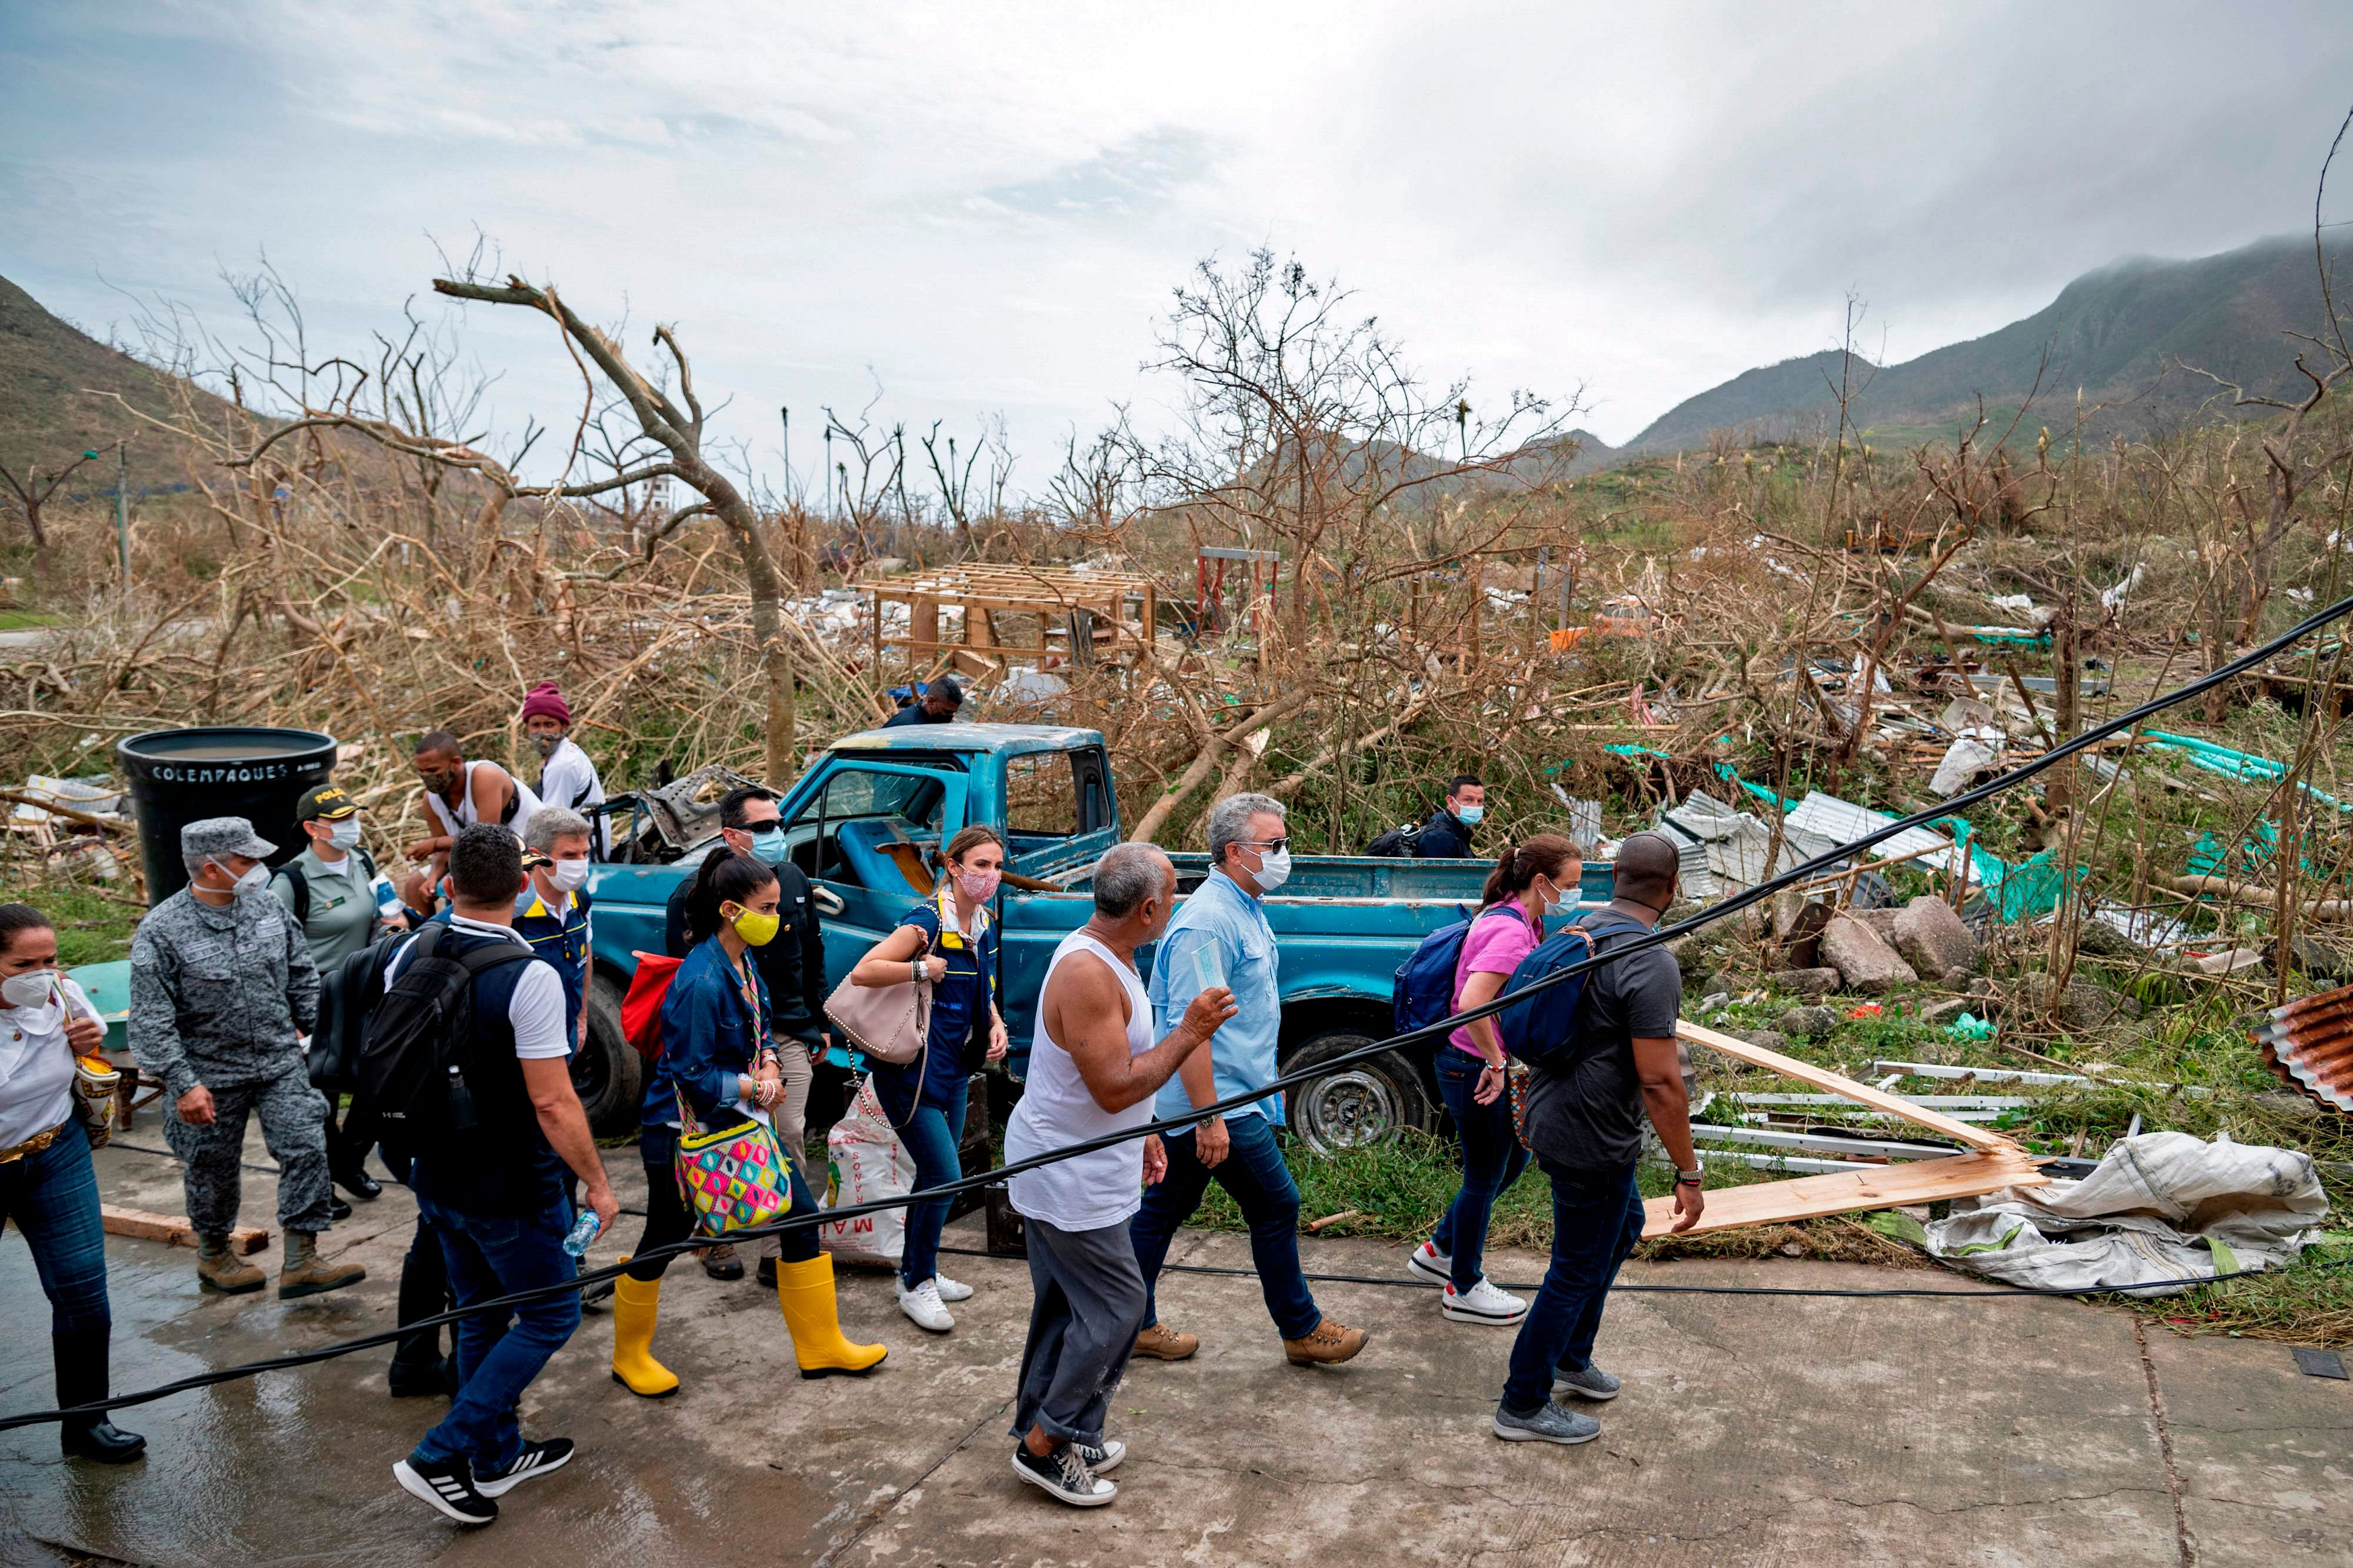 Hurricane Iota in Providencia, Colombia, on November 17, 2020. - Iota left one person dead after sweeping the Colombian Caribbean island of Providencia, where it caused widespread damage. Credit: Colombian Presidency / AFP